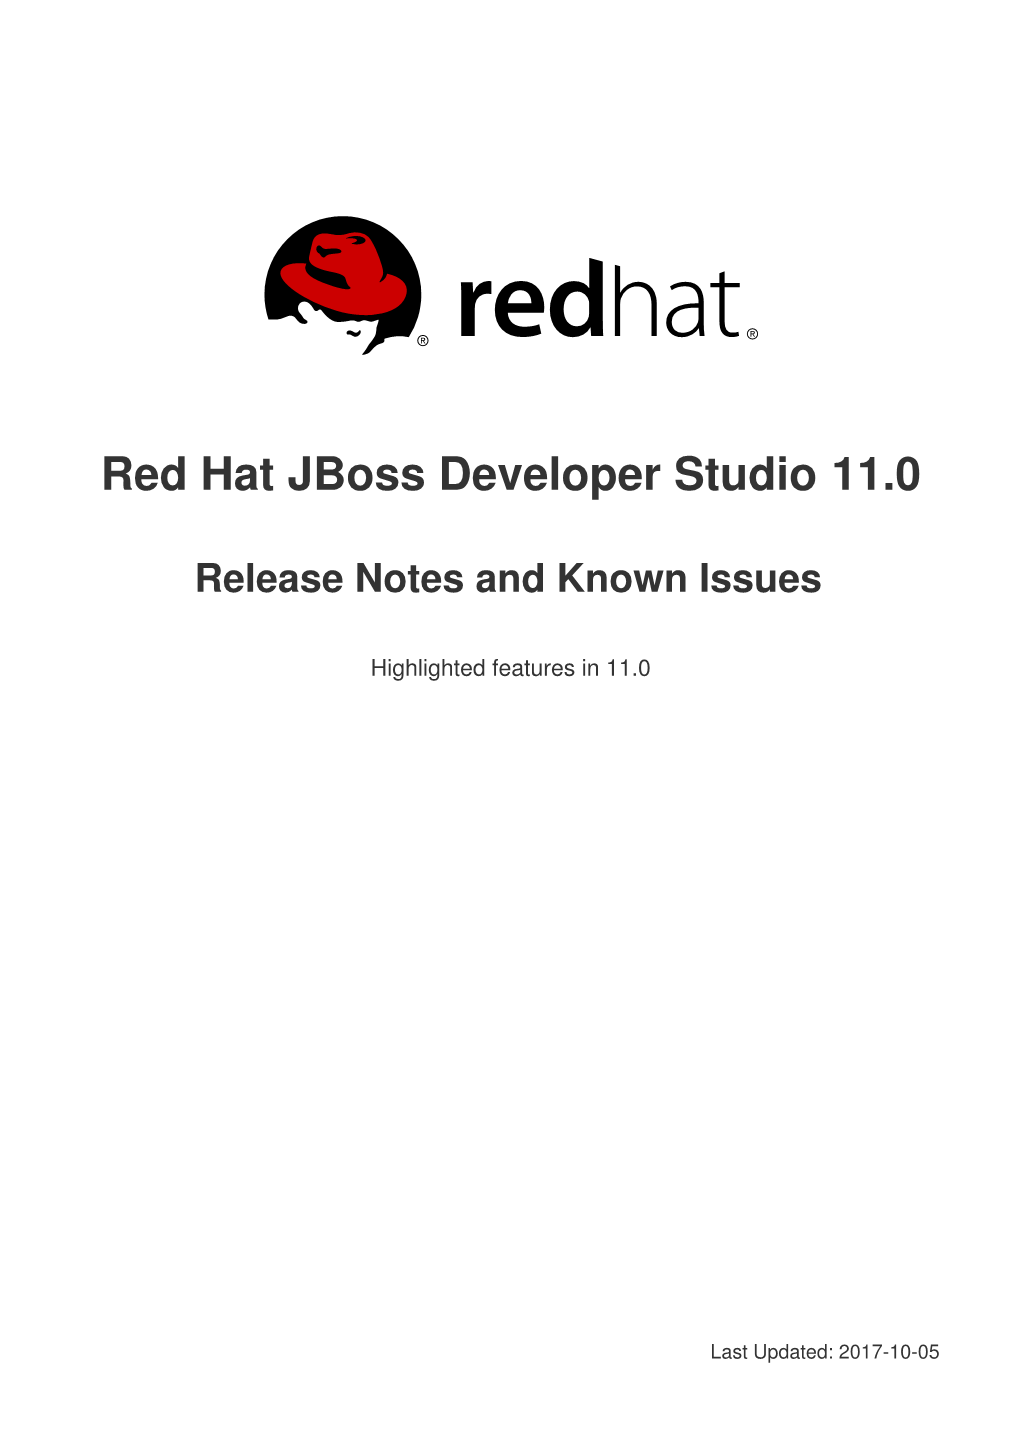 Red Hat Jboss Developer Studio 11.0 Release Notes and Known Issues